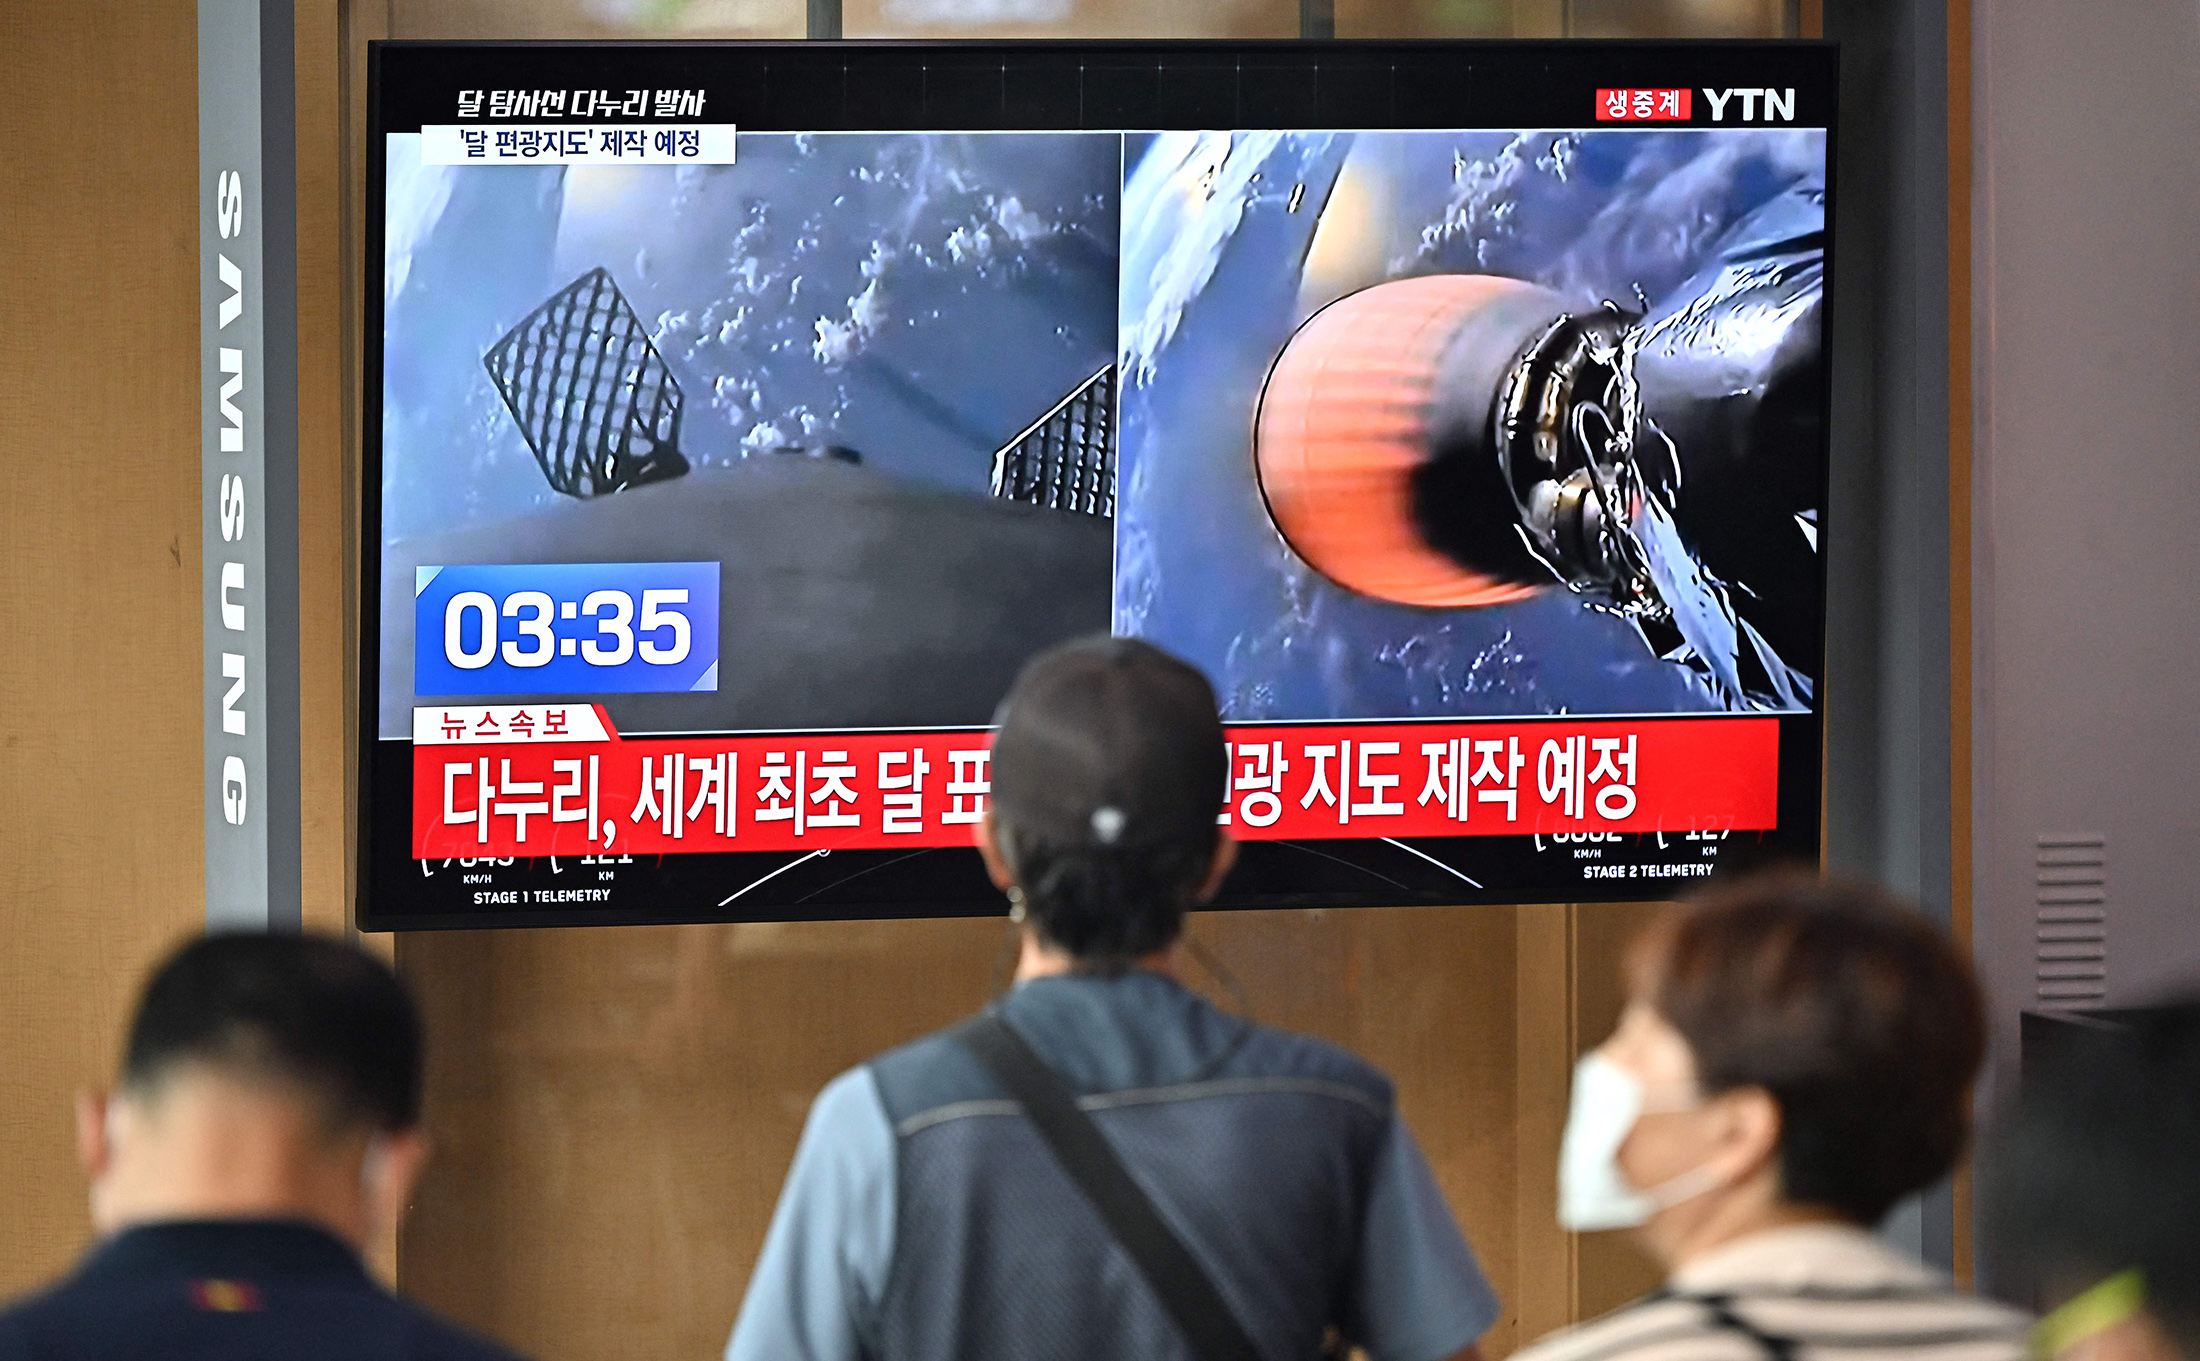 Kmh Tv Sex Video Hd - South Korea Launches First Lunar Orbiter Danuri to Moon on SpaceX Rocket -  Bloomberg